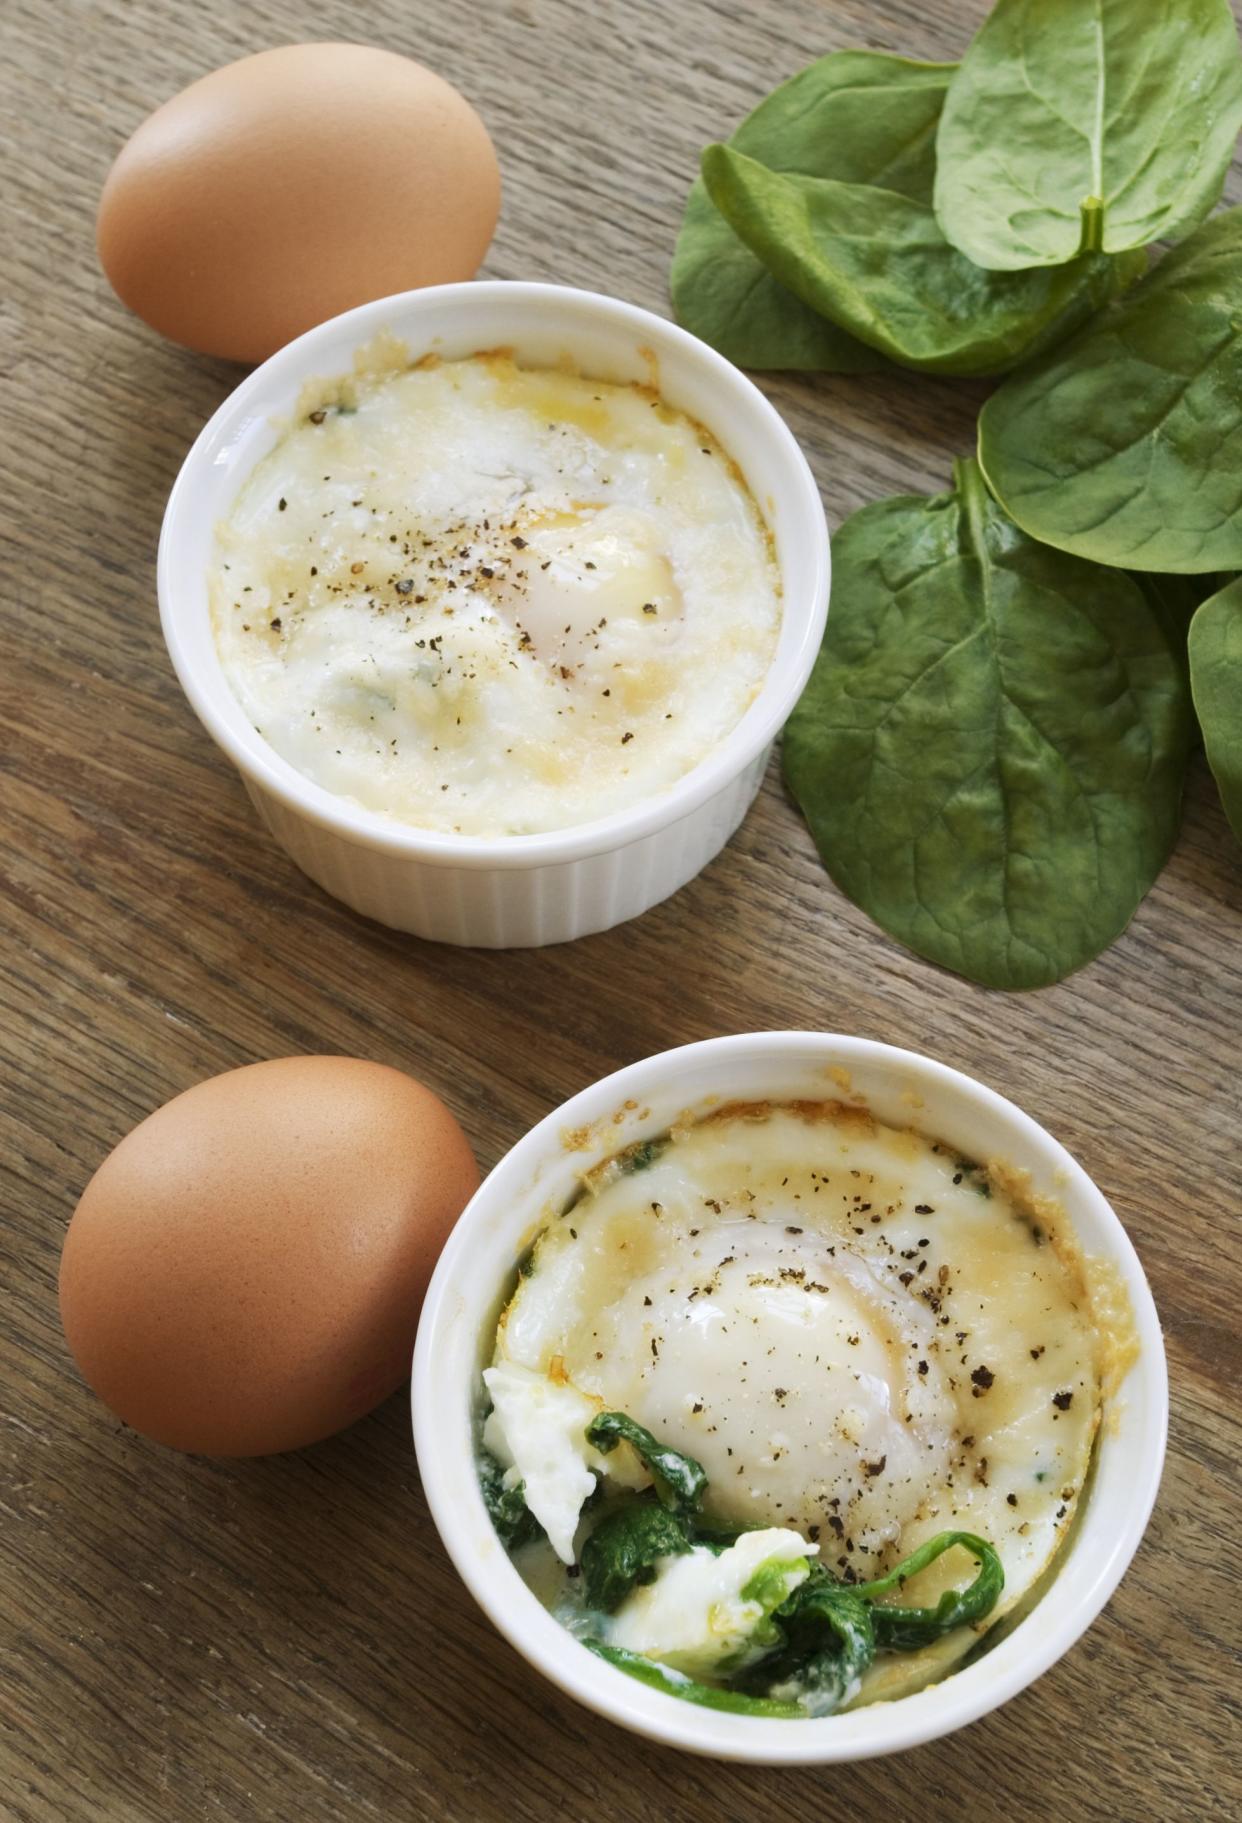 A french egg dish cooked in a ramekin. This is the version made with spinach eggs and parmesan cheese.